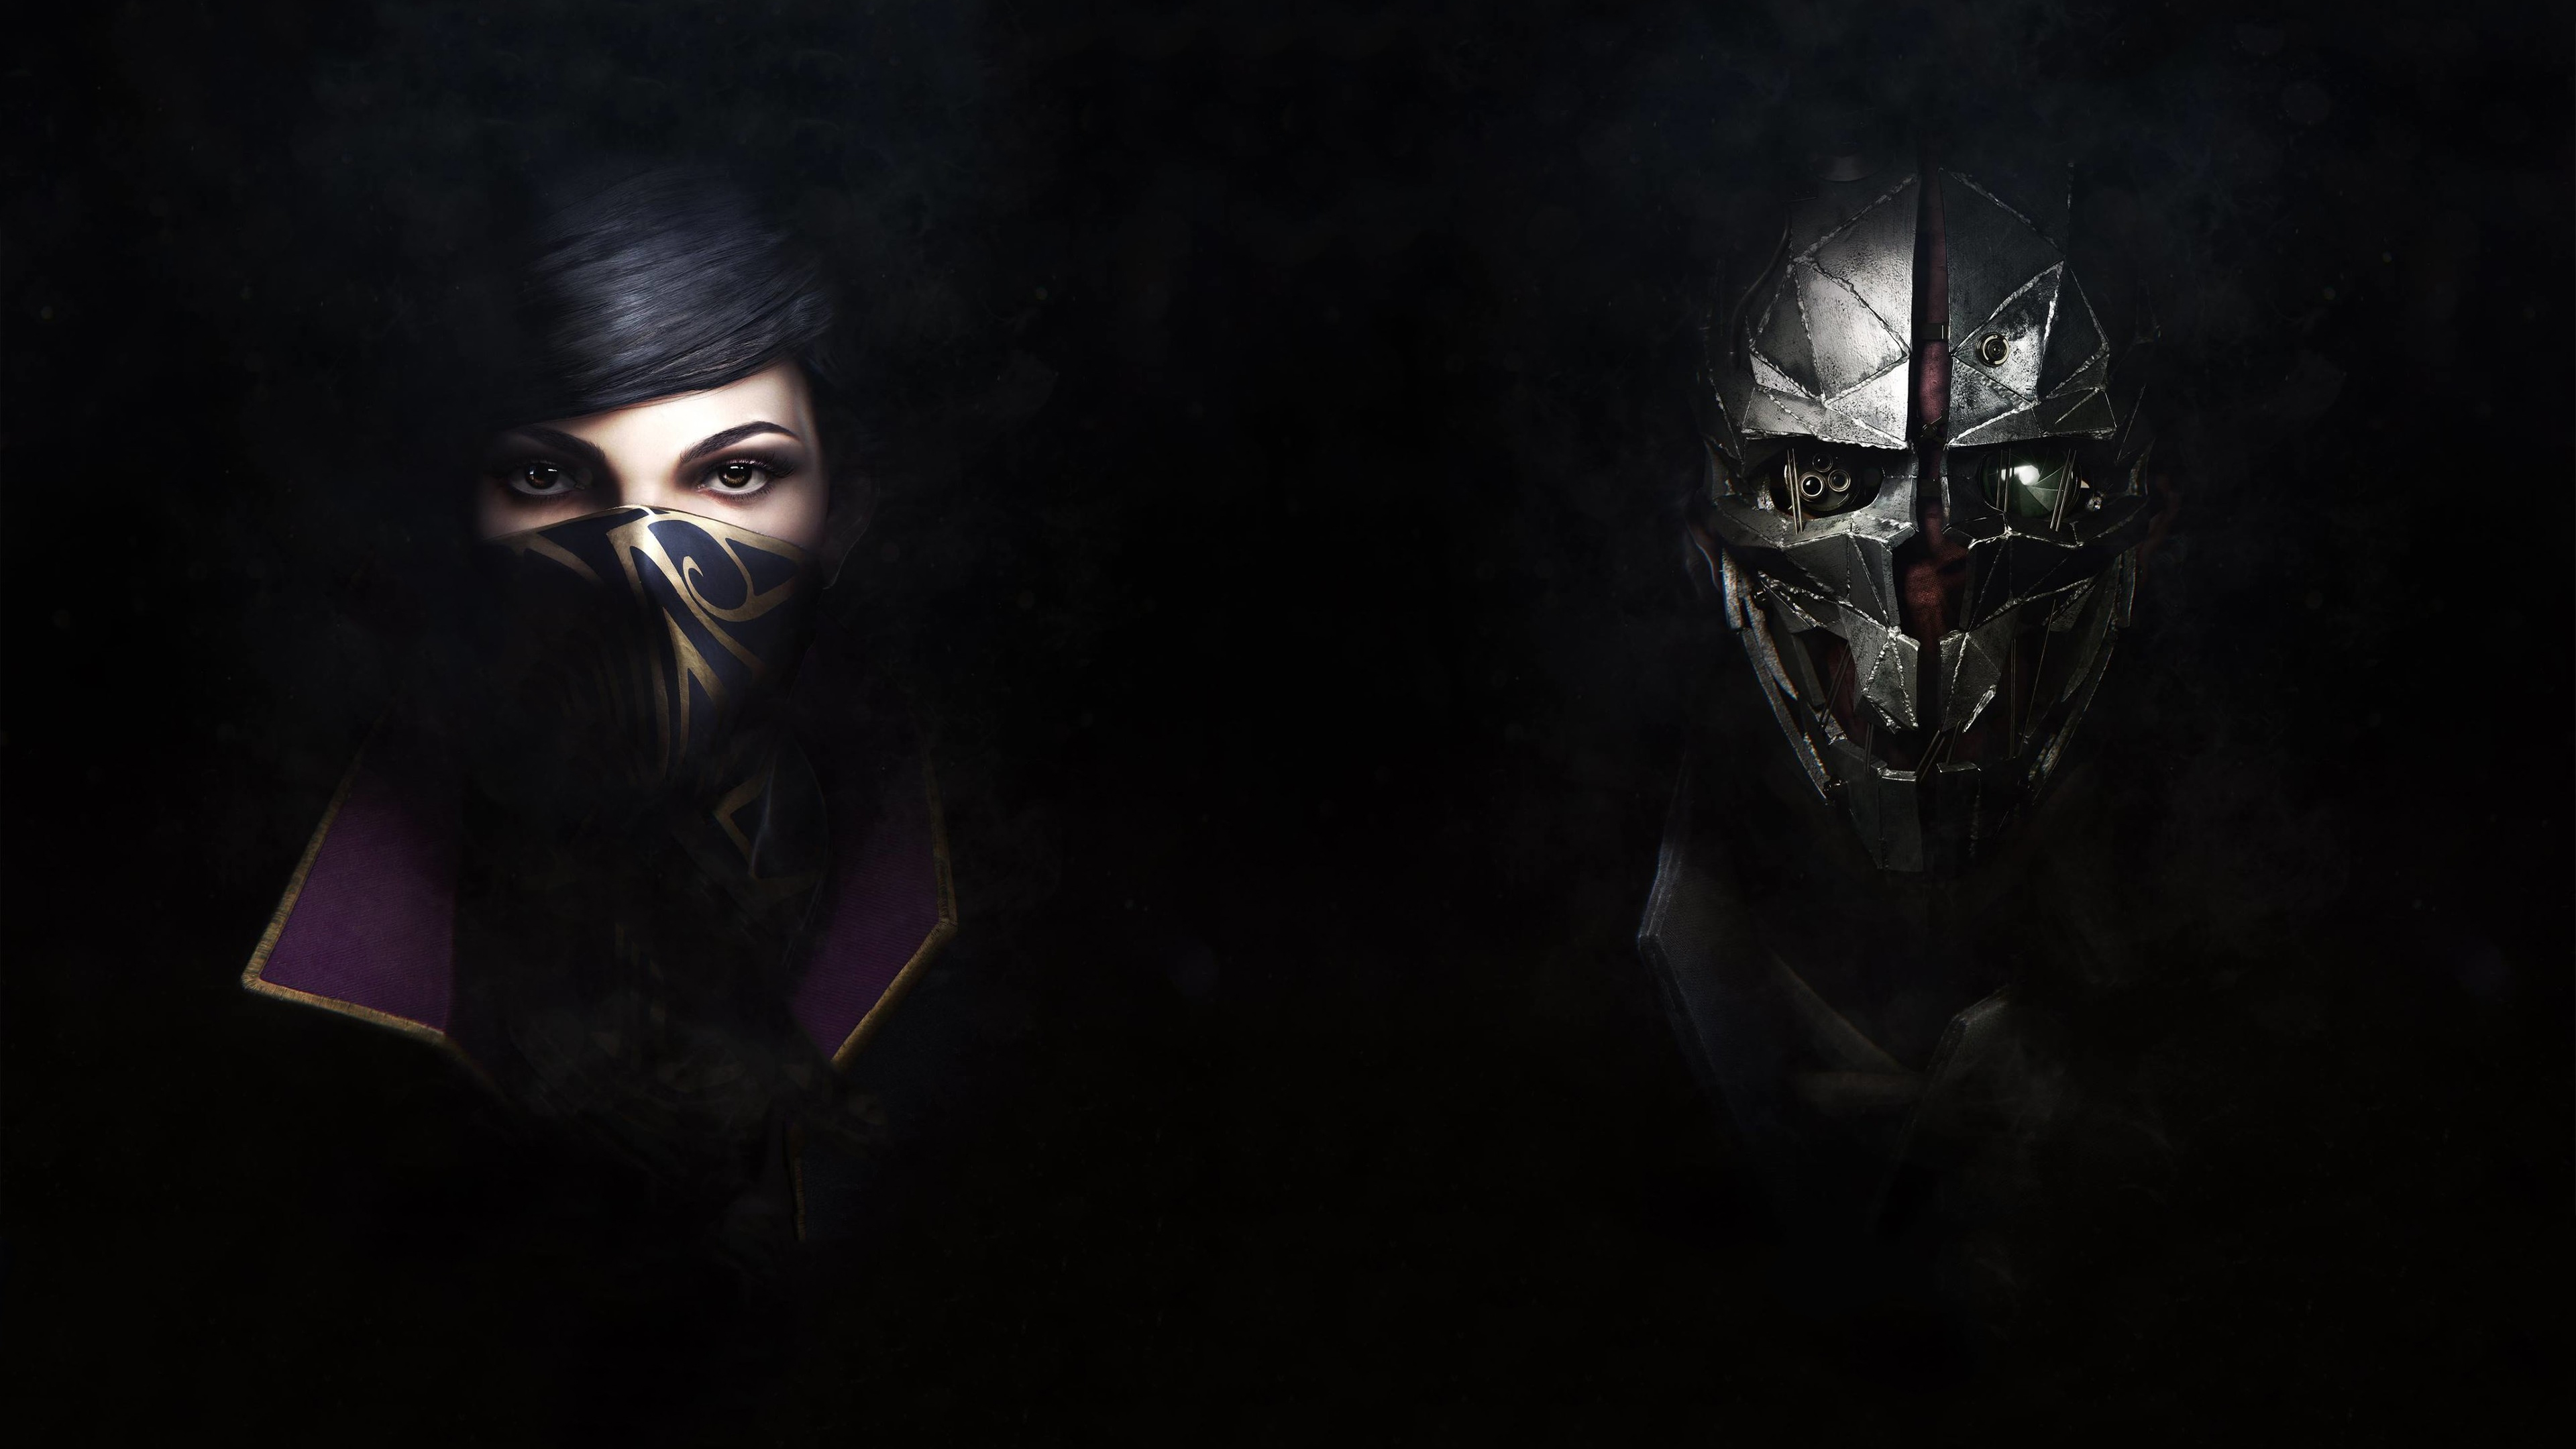 dishonored wallpaper,darkness,fictional character,cg artwork,illustration,fiction